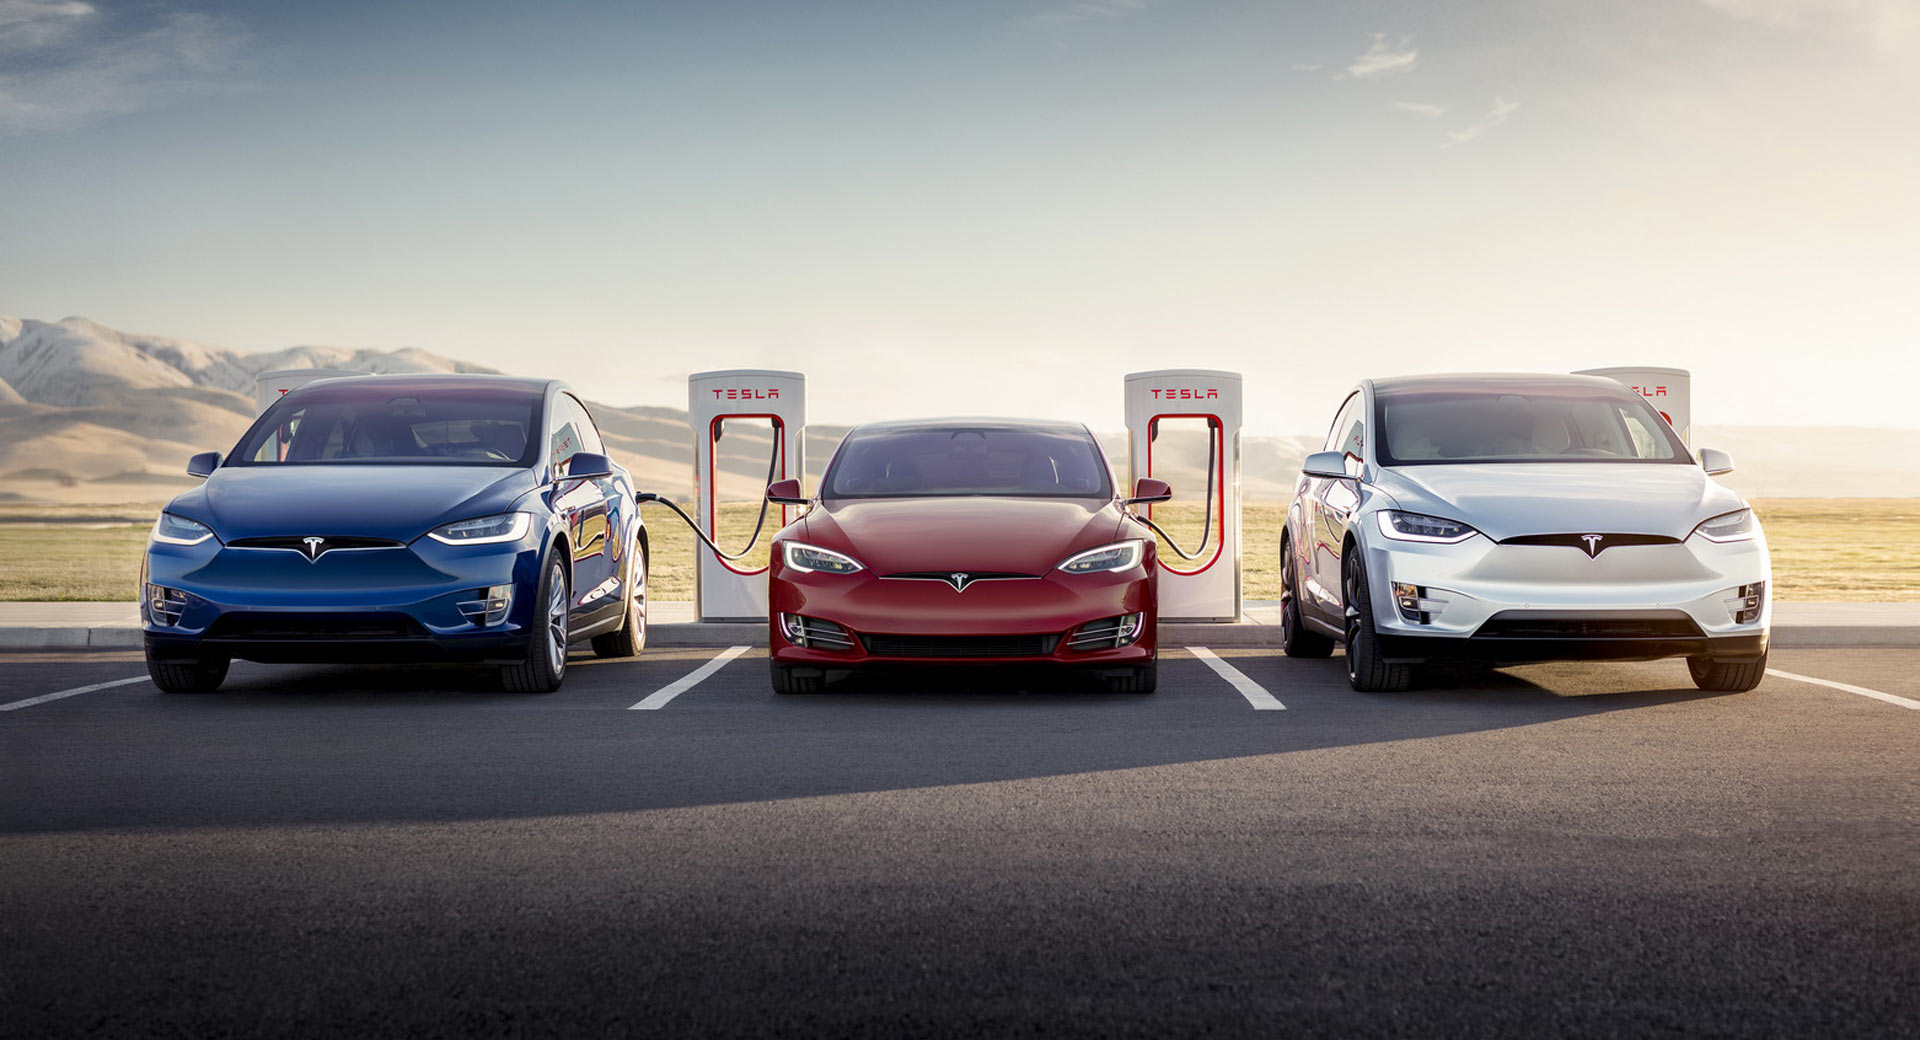 Select Tesla Superchargers To Cap Vehicle Charge To 80 Per Cent